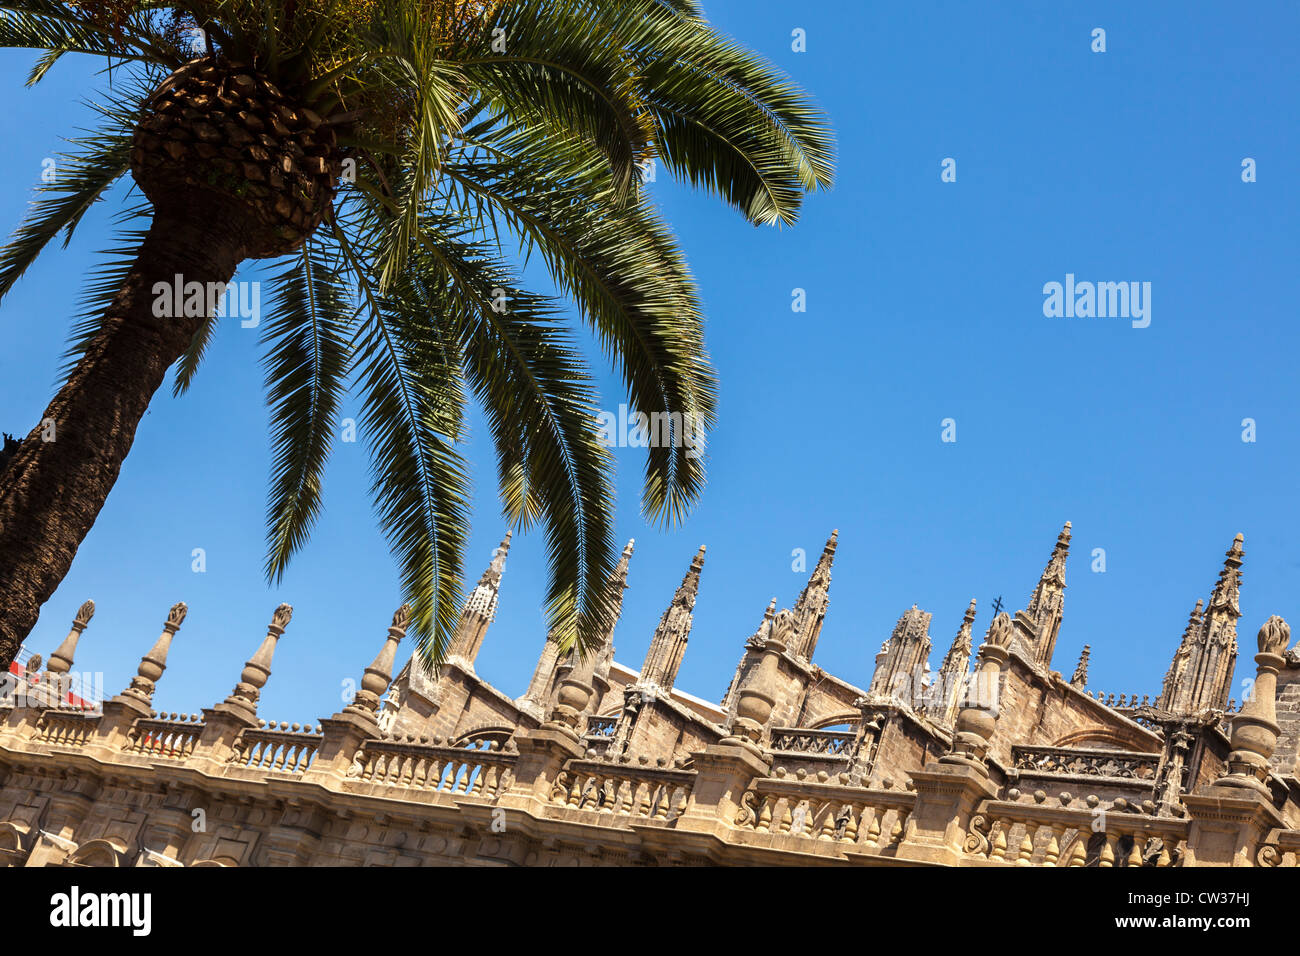 Seville, Andalusia, Spain, Europe. Palm tree seen in front of the roof of Cathedral of Saint Mary of the See. Stock Photo